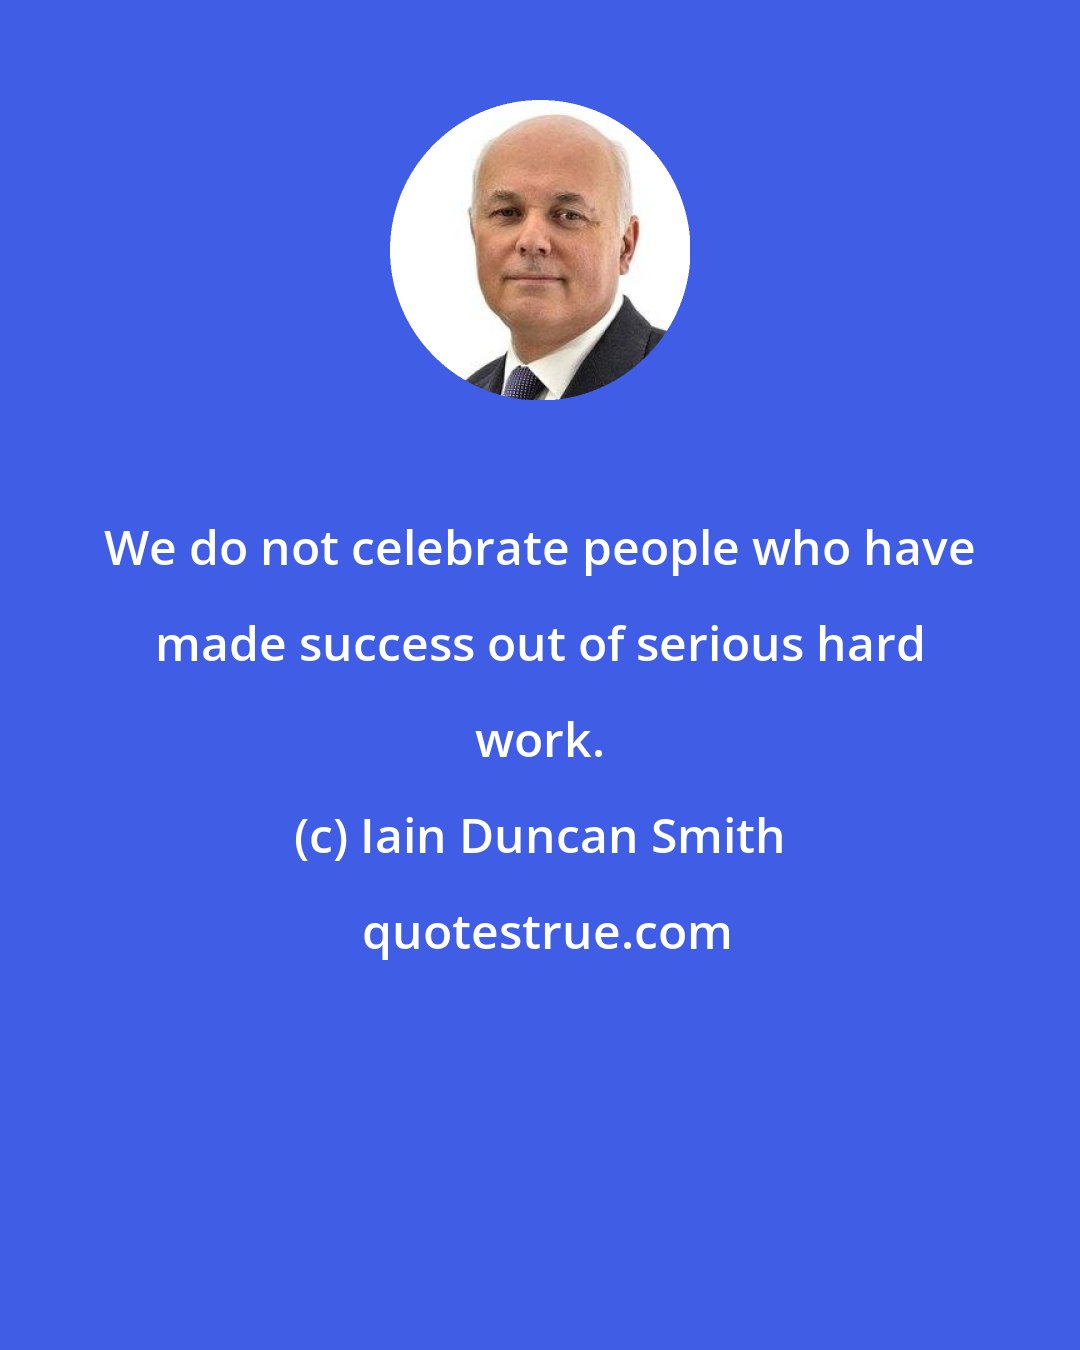 Iain Duncan Smith: We do not celebrate people who have made success out of serious hard work.